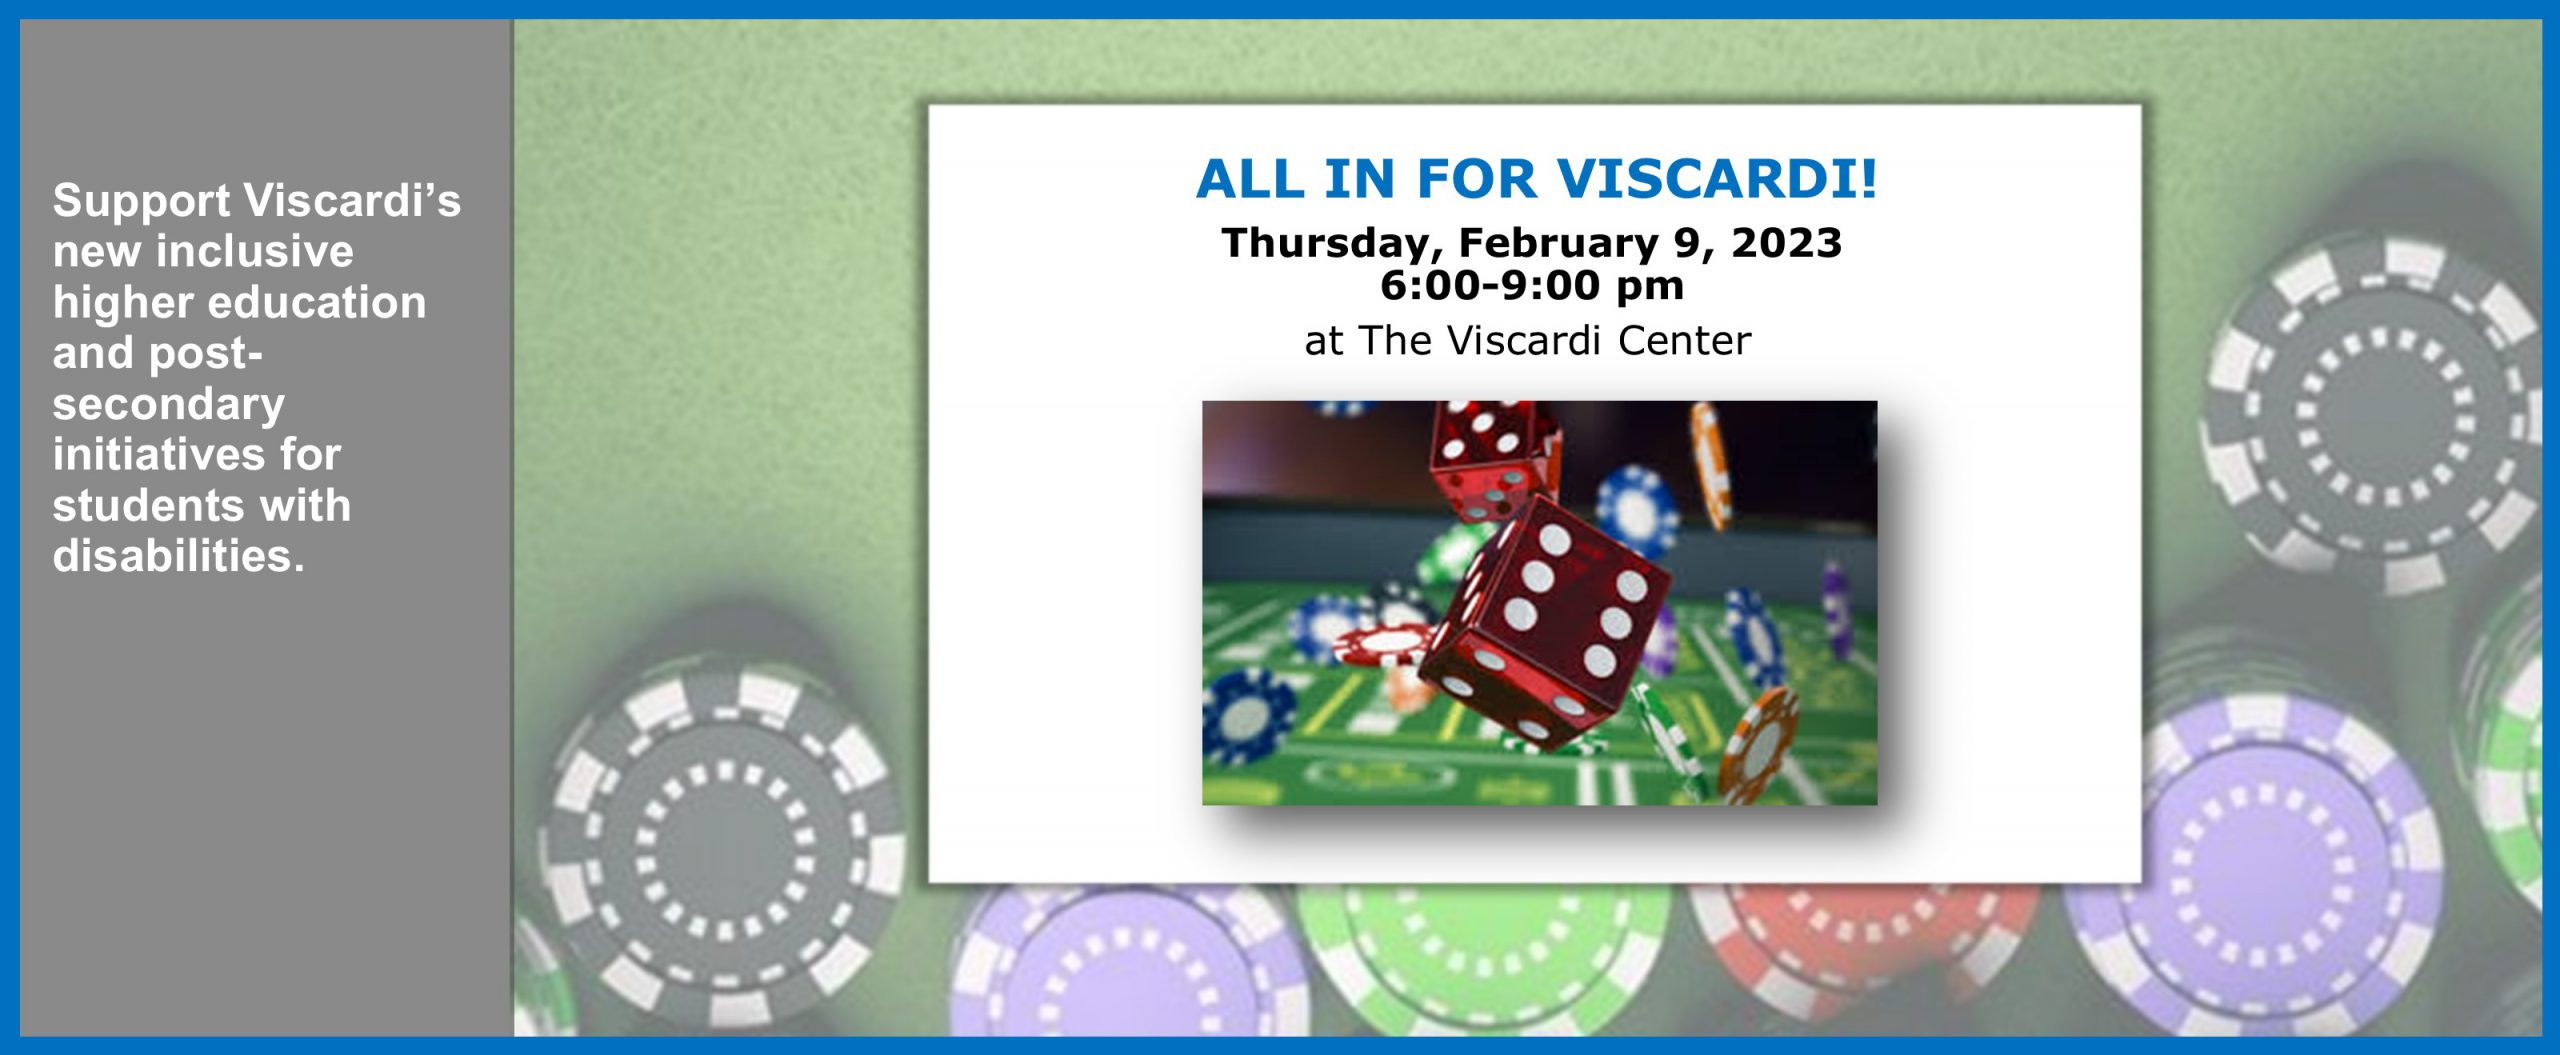 All in Viscardi, Thursday, February 9, 2023 from 6 to 9 pm at The Viscardi Center